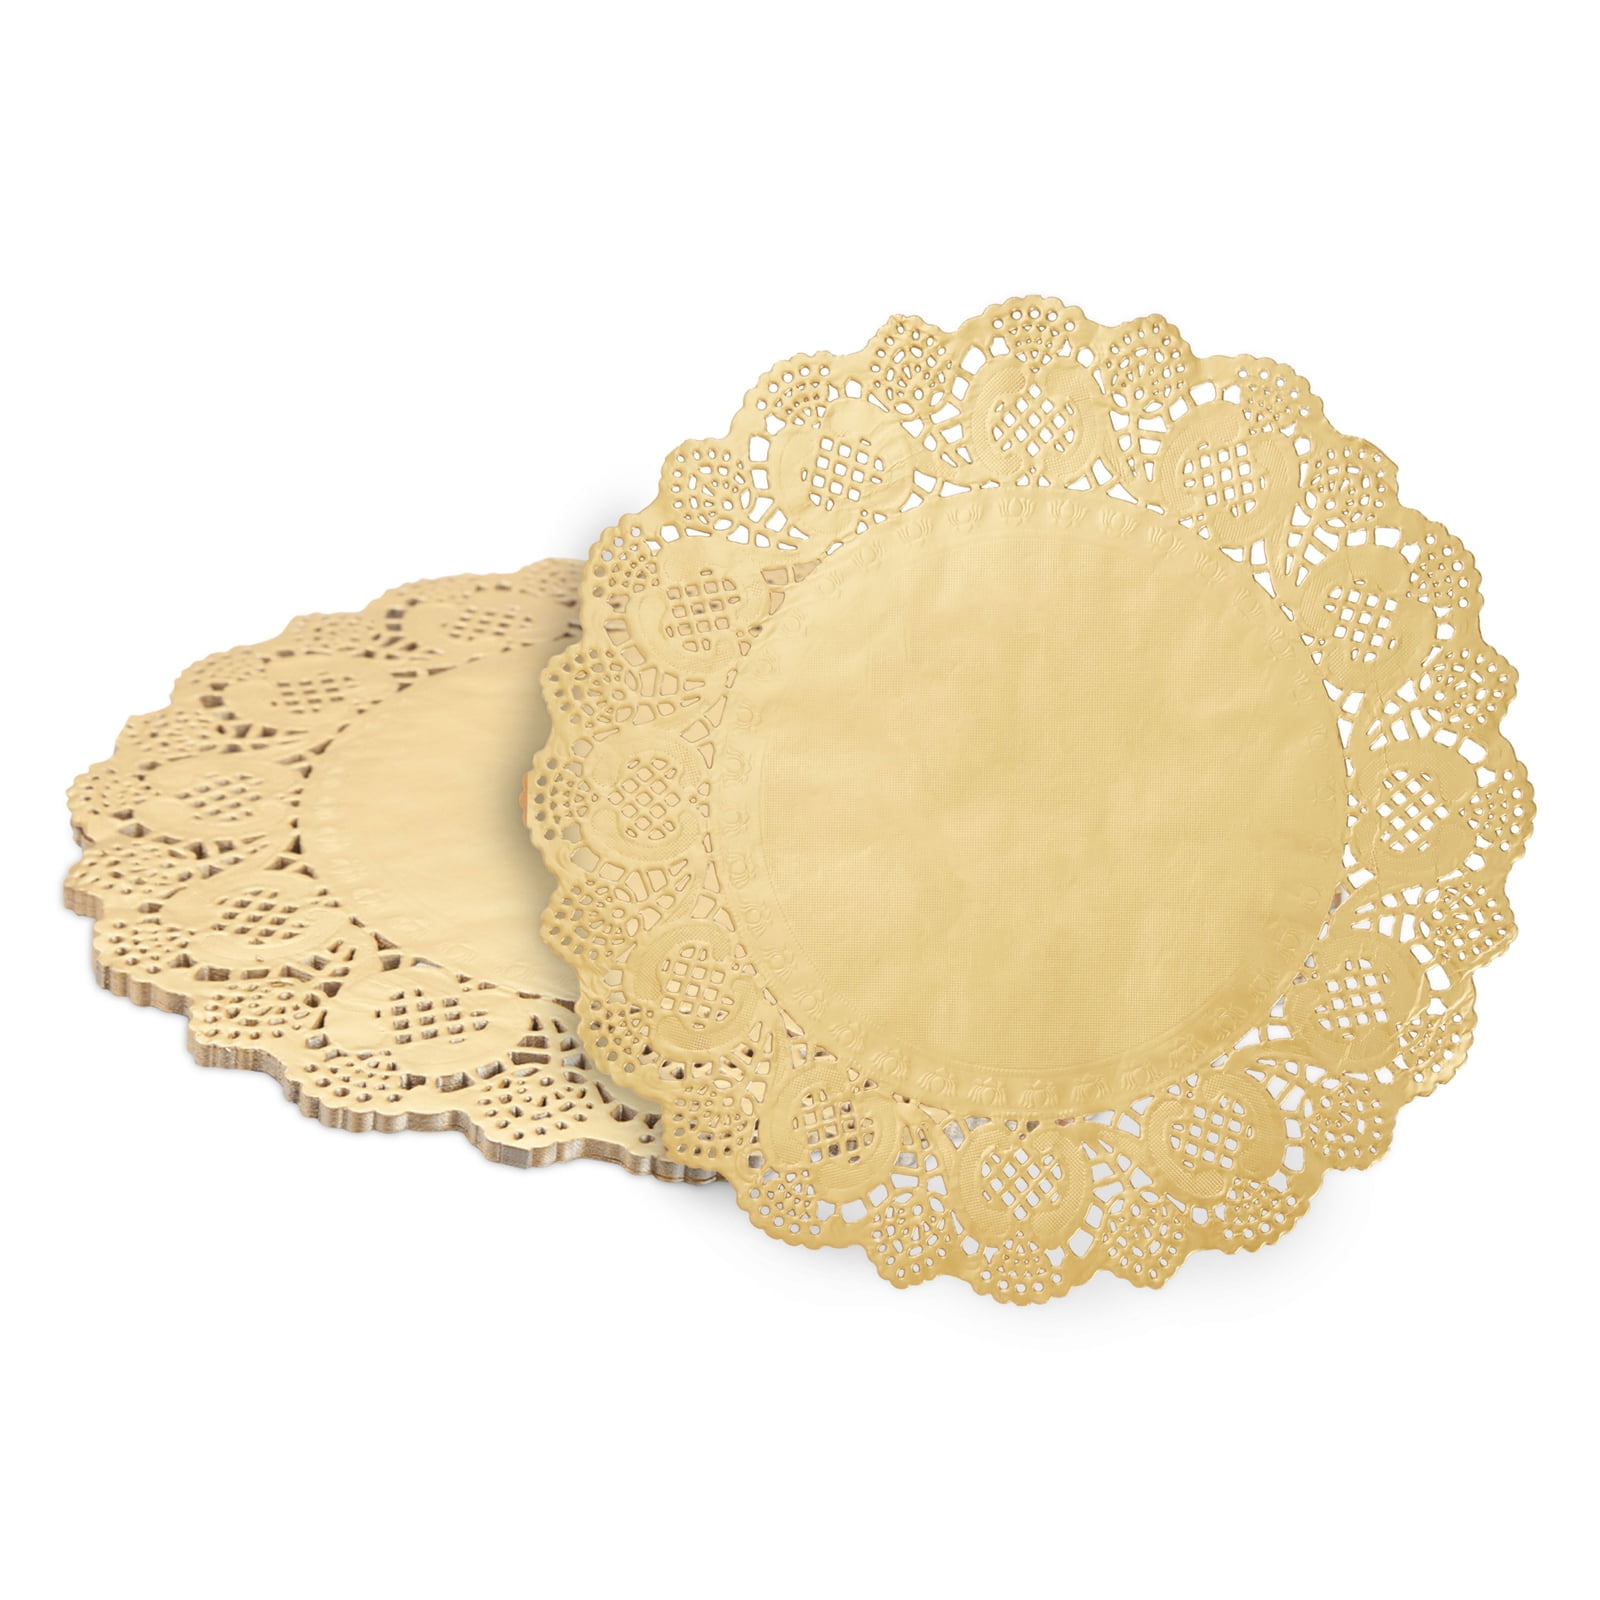 Doily 16 Inch Metallic Gold Rose Lace Victorian Flower 